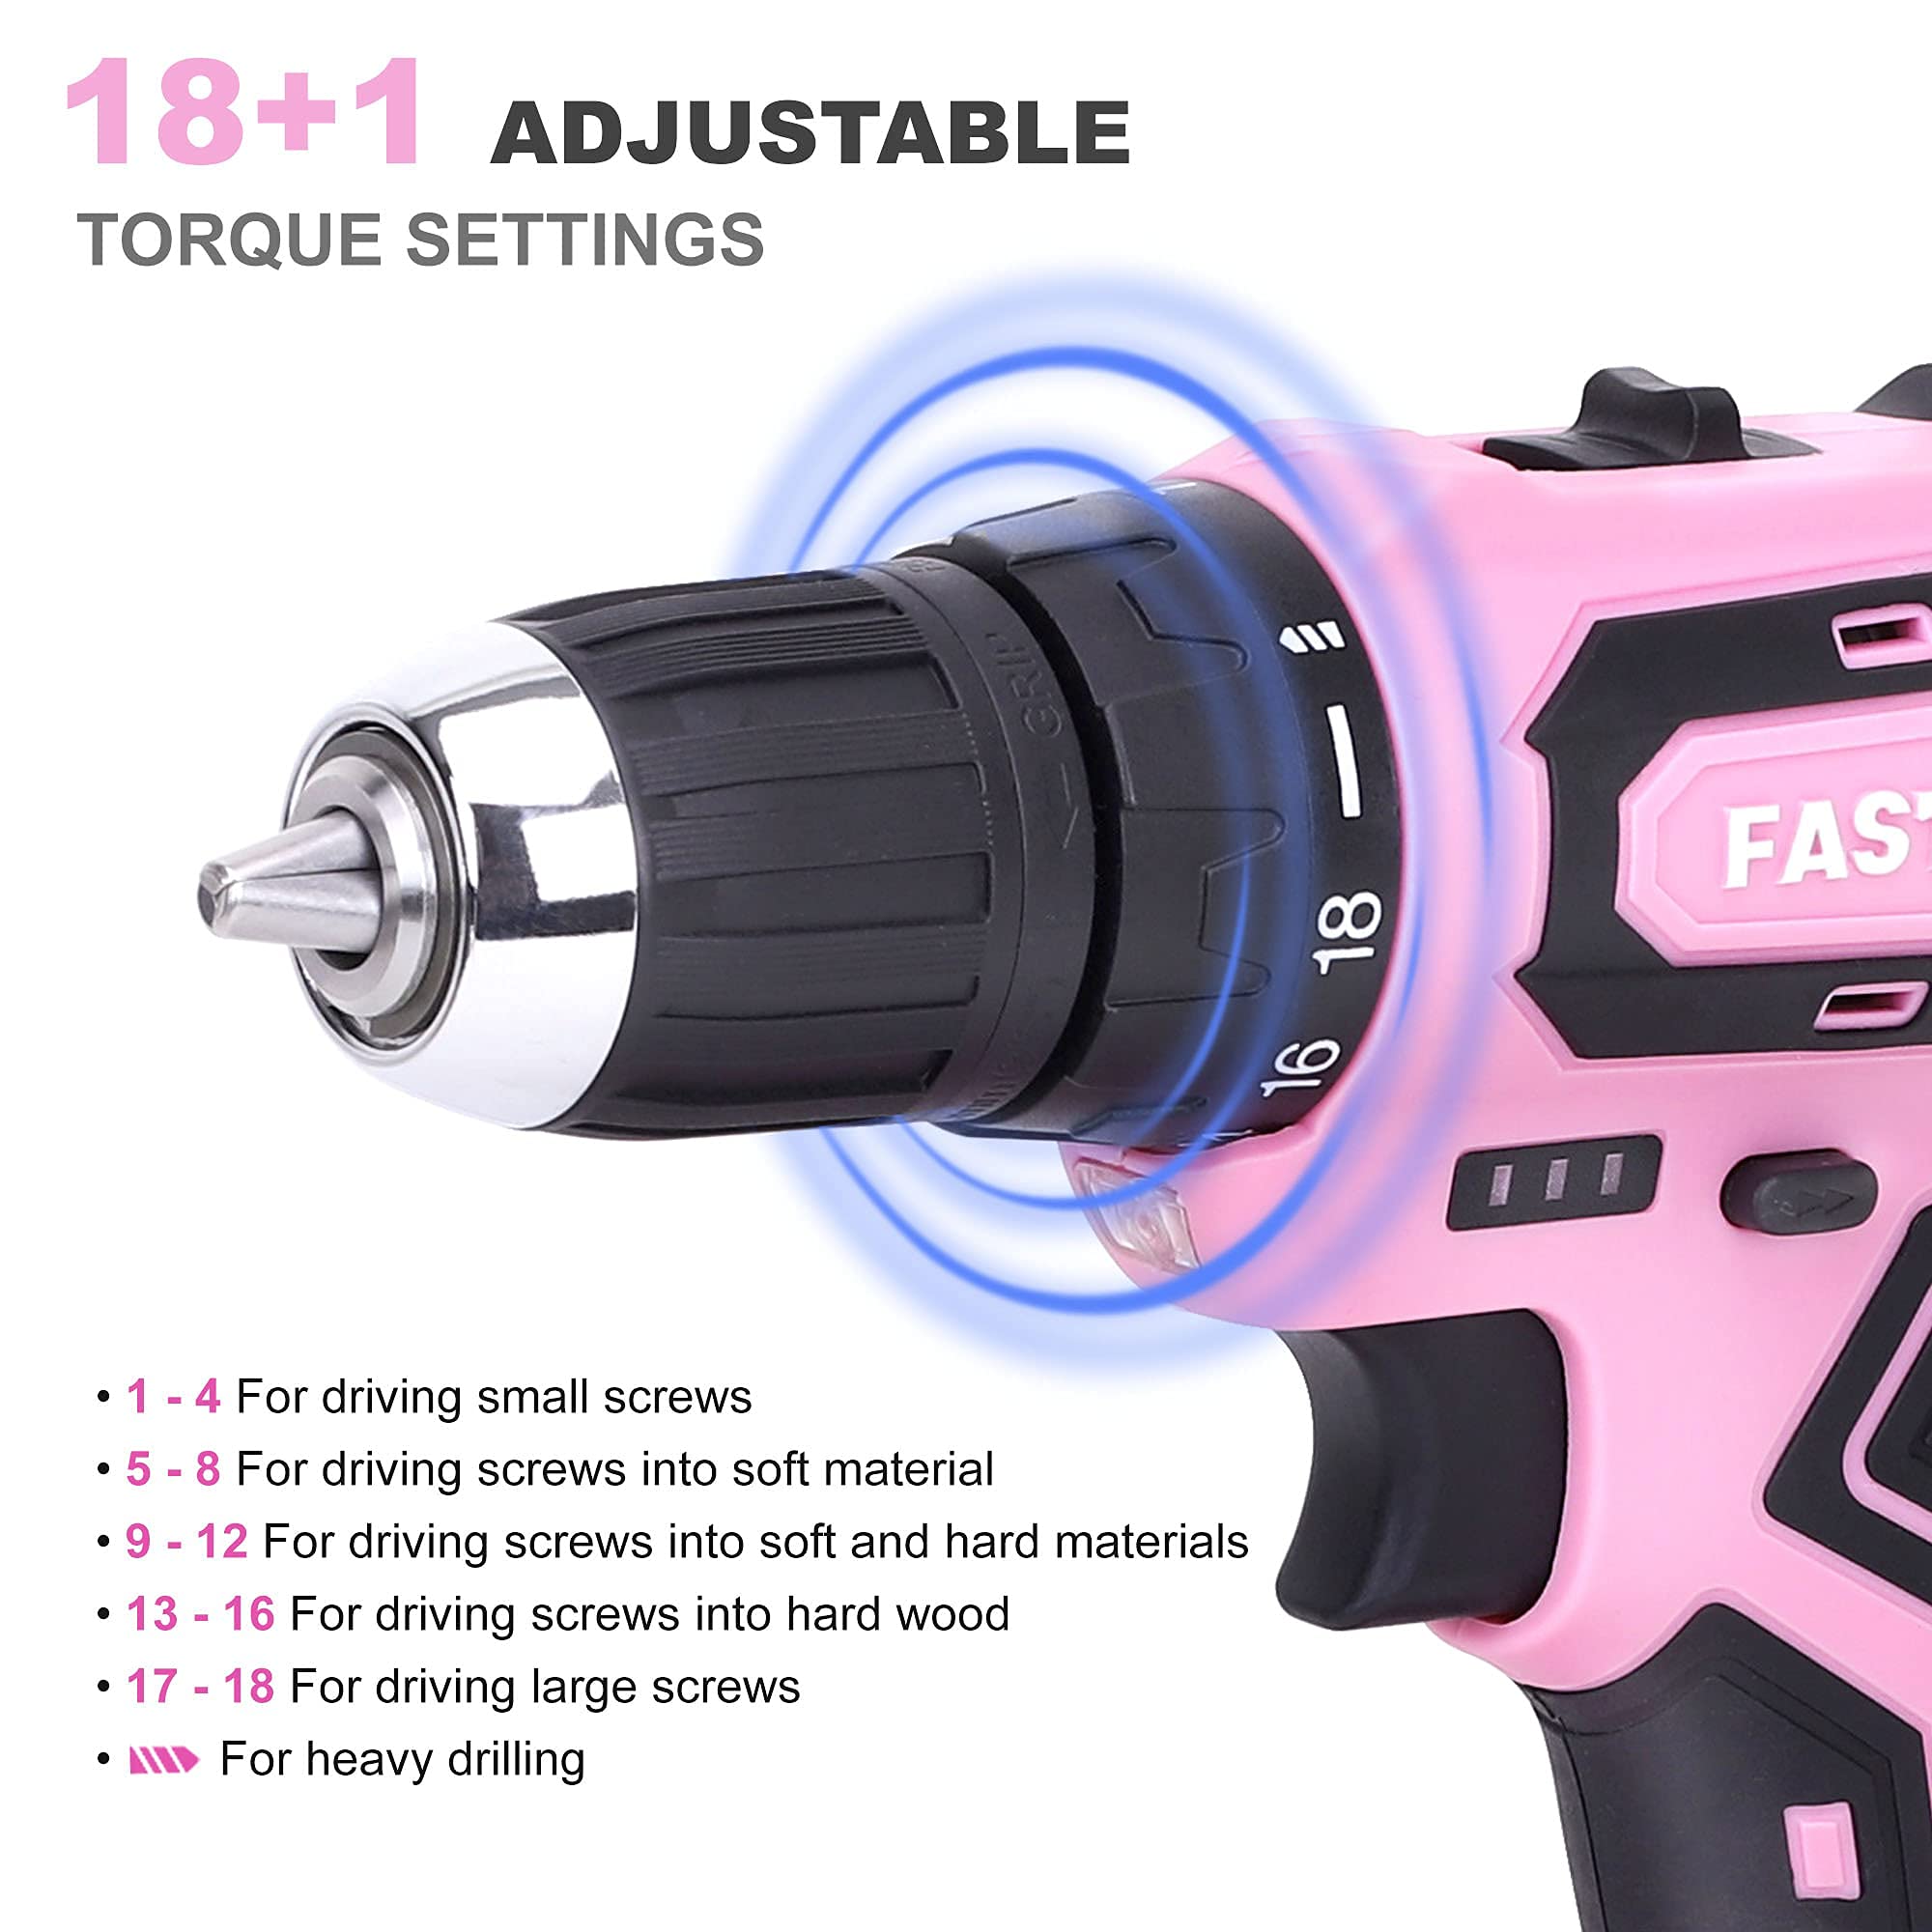 FASTPRO 232-Piece 20V Pink Cordless Lithium-ion Drill Driver and Home Tool Set